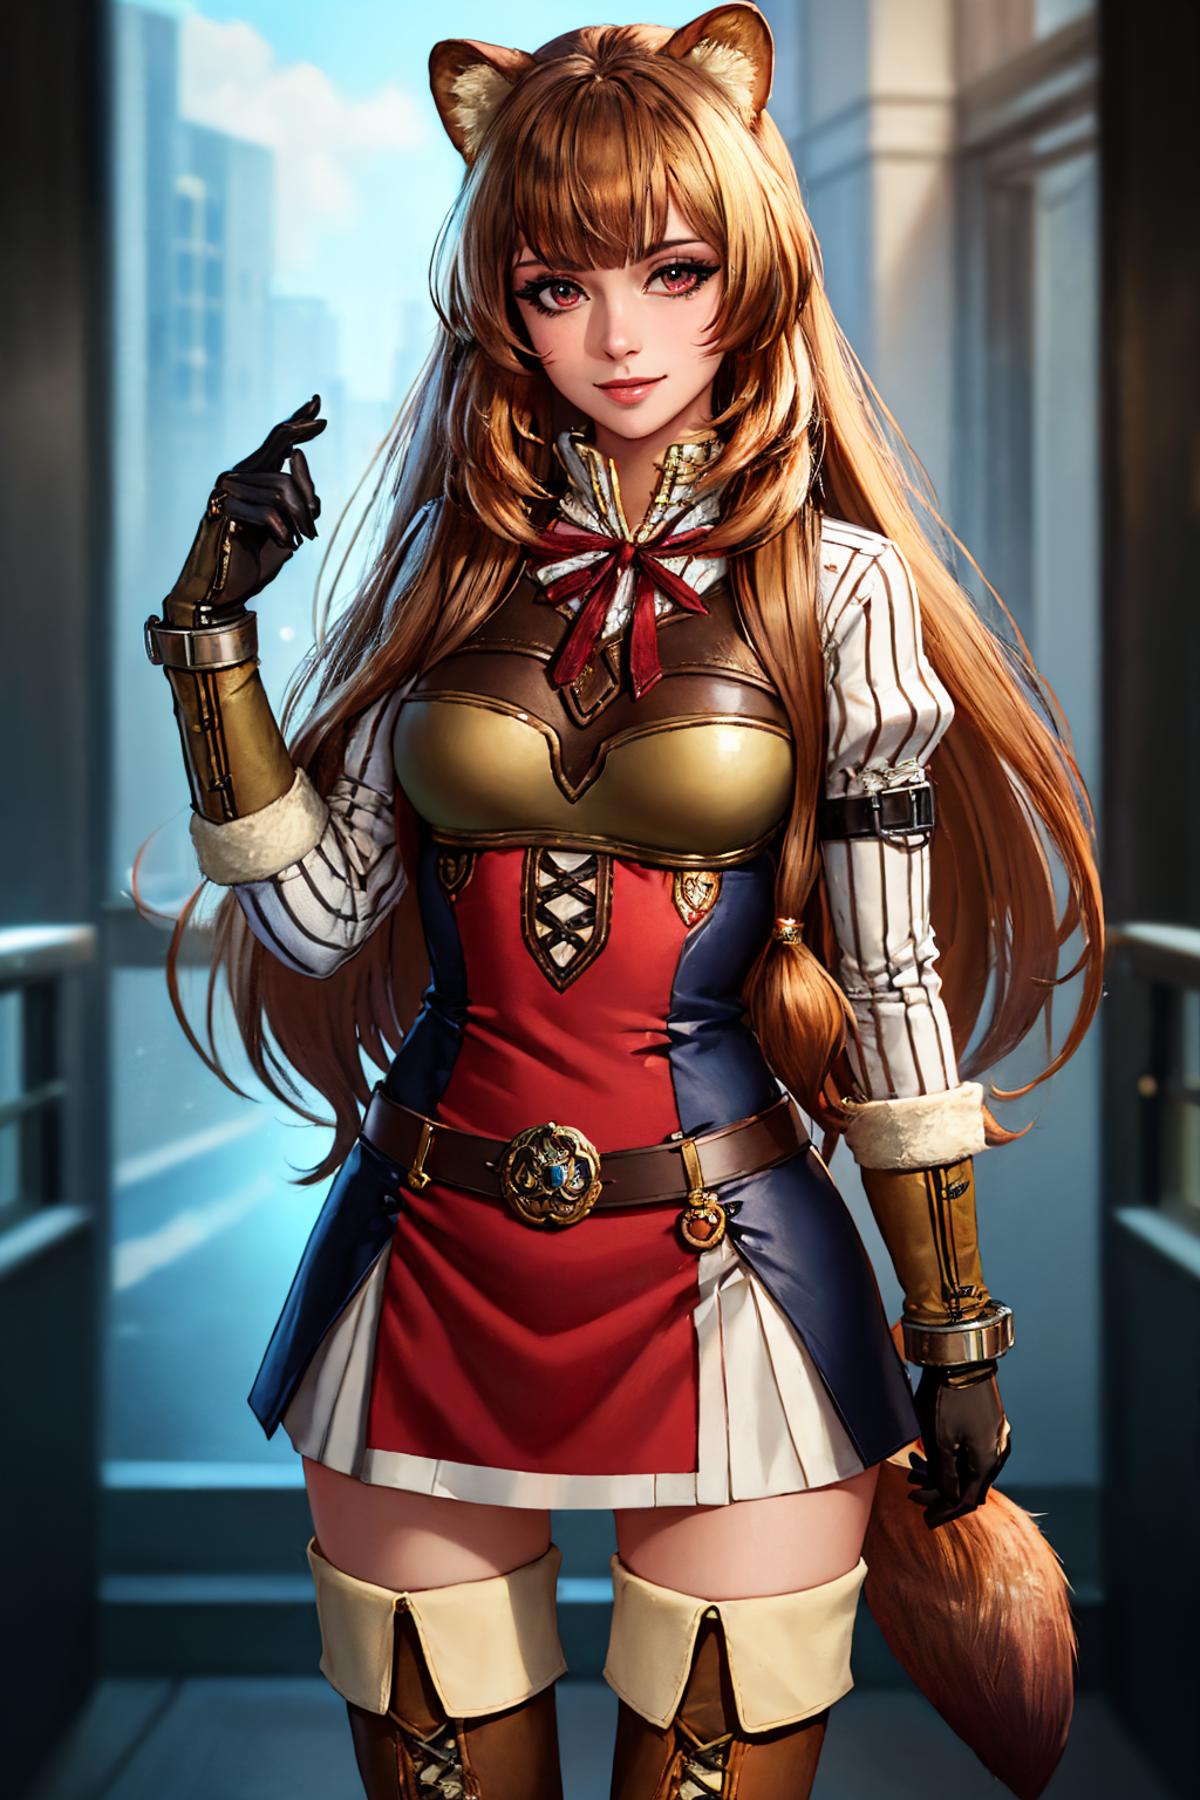 Raphtalia | The Rising of the Shield Hero image by justTNP